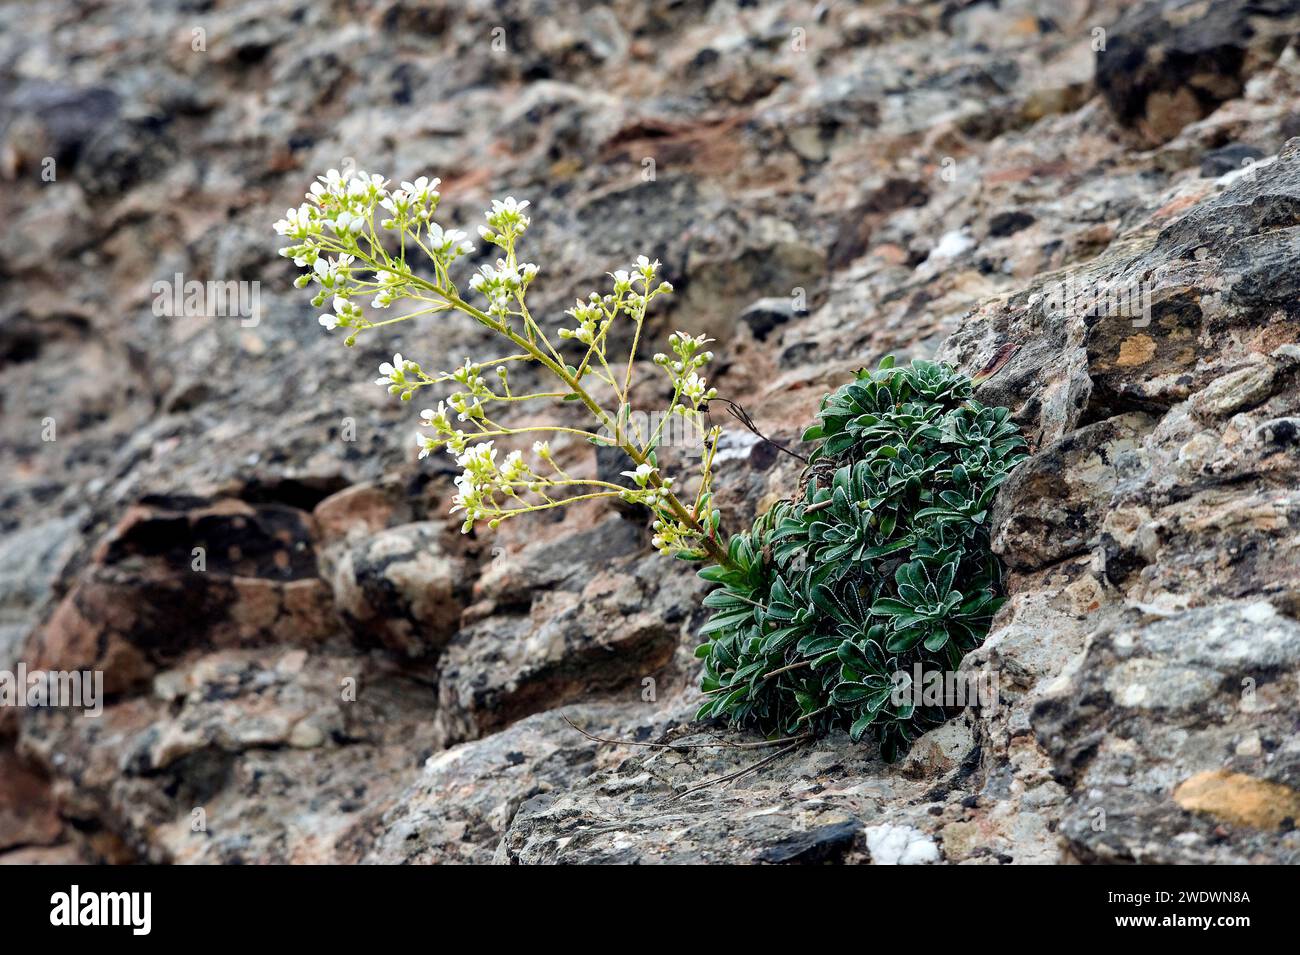 Limestone saxifrage (Saxifraga callosa) is a perennial herb native to some mountains of Catalonia (Spain), south France and Italy. The copy of the pho Stock Photo